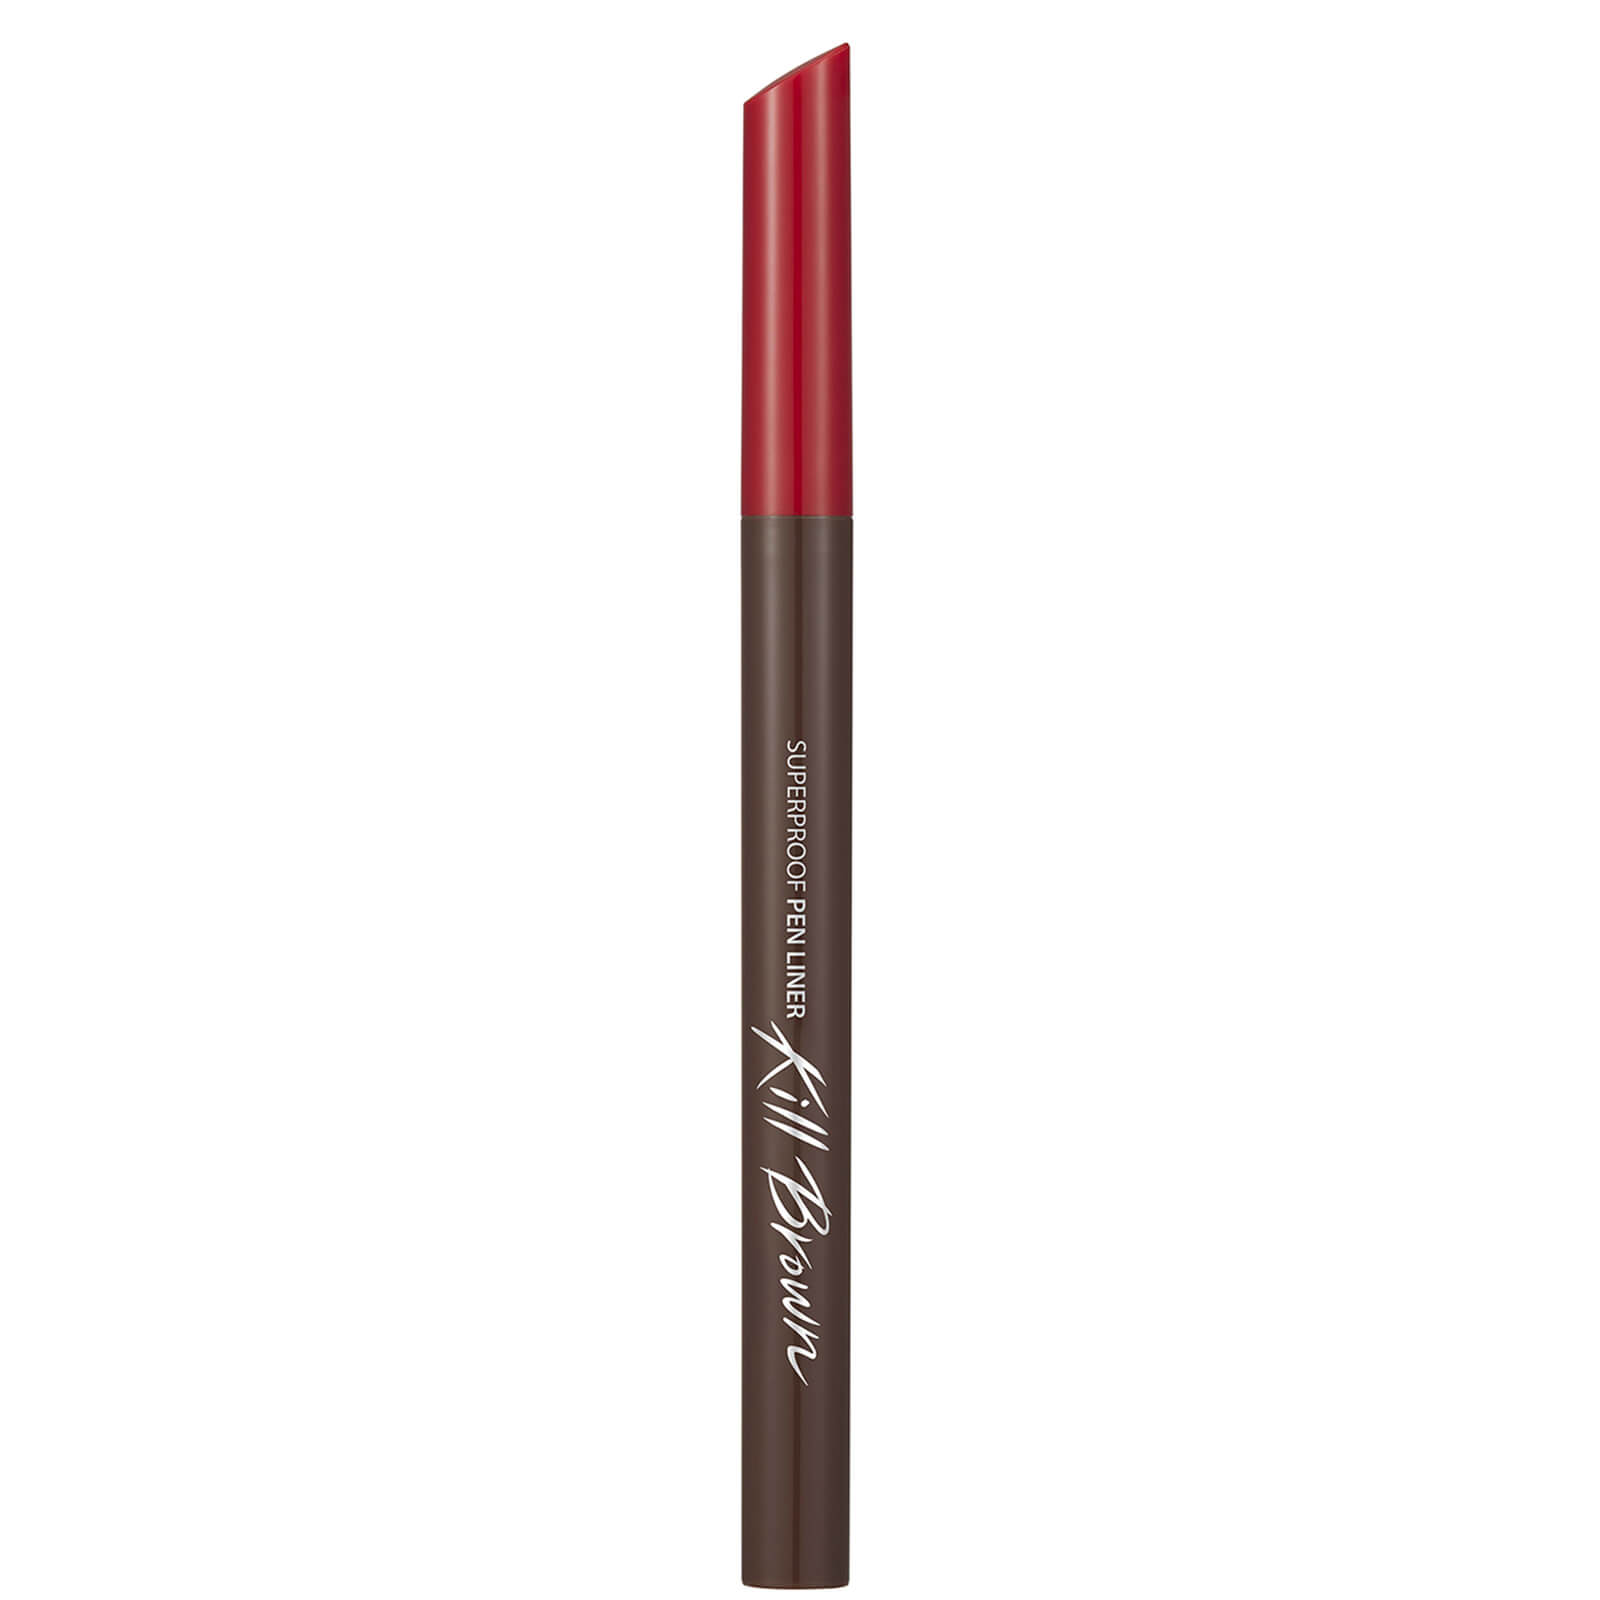 CLIO Kill Superproof Pen Liner 12g (Various Shades) - 03 Cacao Brown